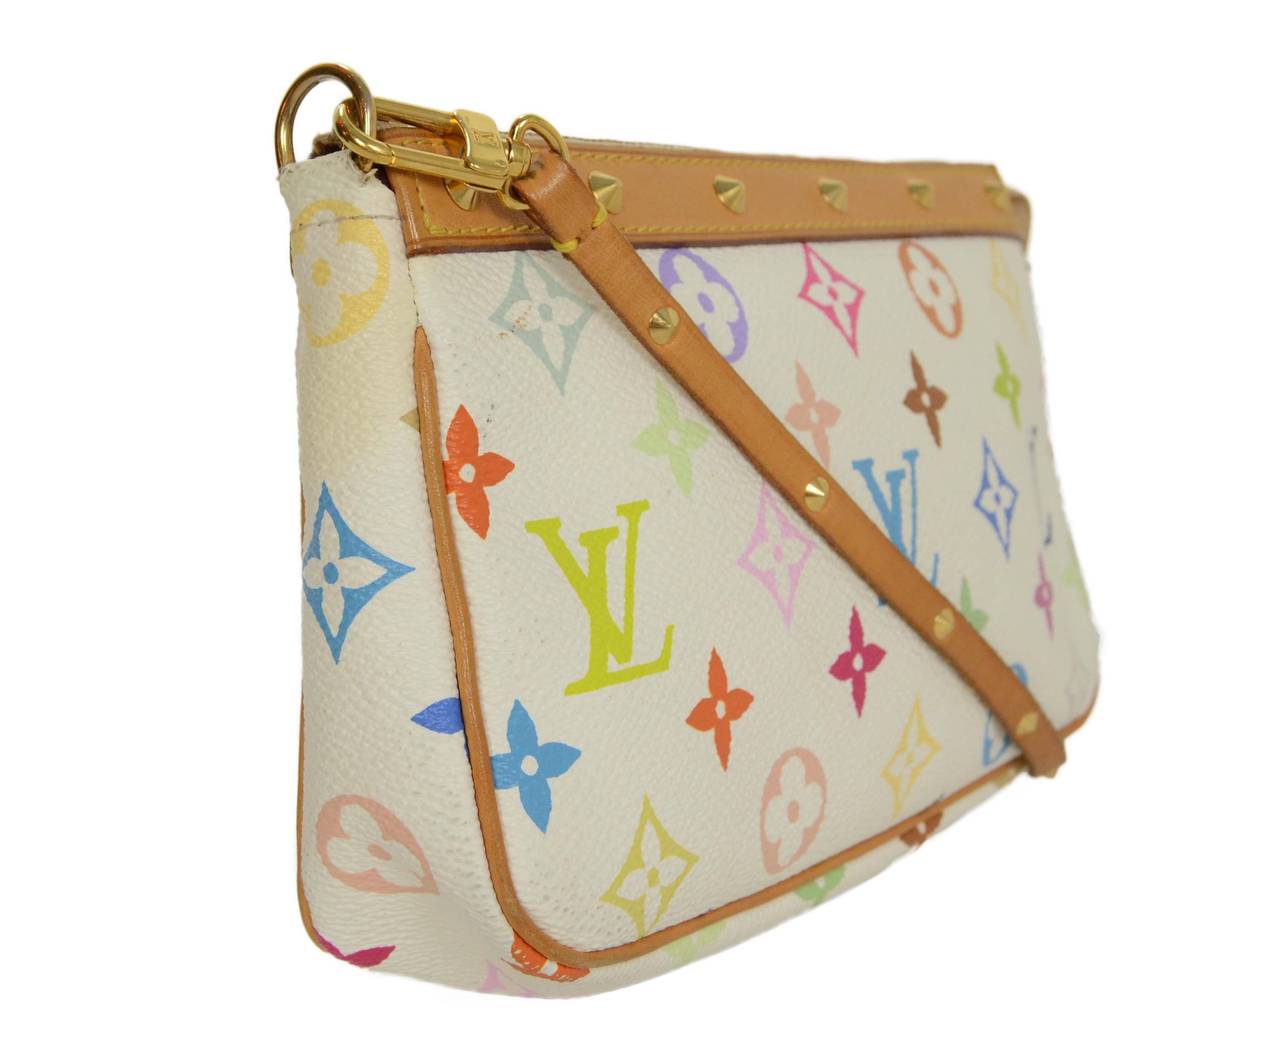 Louis Vuitton Multi-Colored Monogram Pochette 
Features goldtone studs throughout leather trim
Made In: France
Year of Production: 2003
Color: White, multi-colored monogram, tan and goldtone
Hardware: Goldtone
Materials: Coated canvas, leather